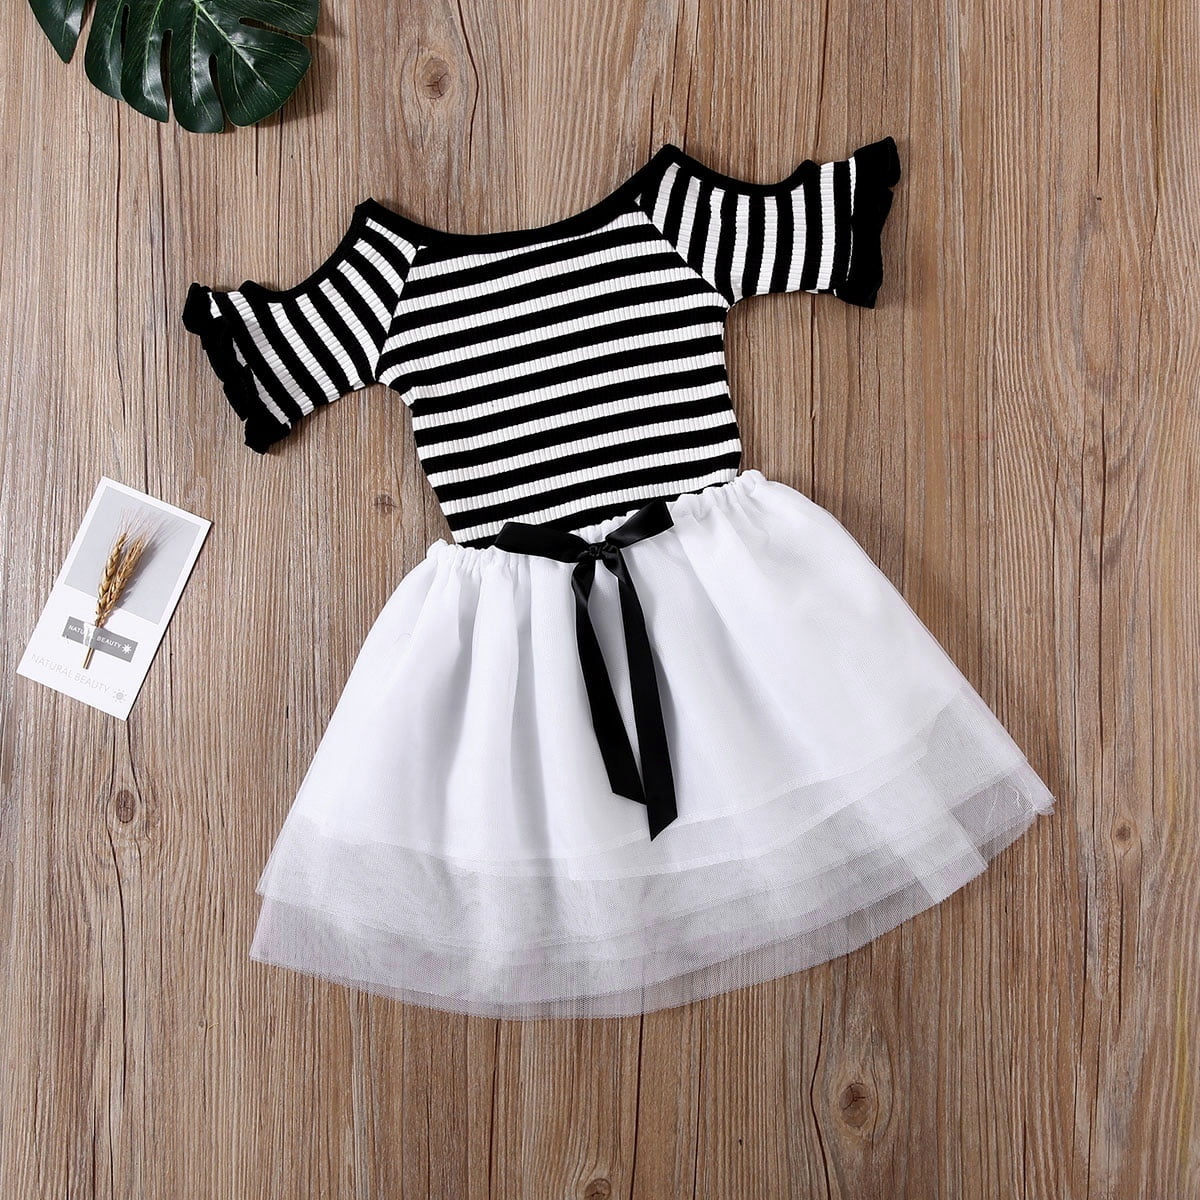 2pcs Baby Girl Kid Ruffled Sleeve Striped T-Shirt+Tulle Tutu Bow Skirt Set Outfits Clothes 